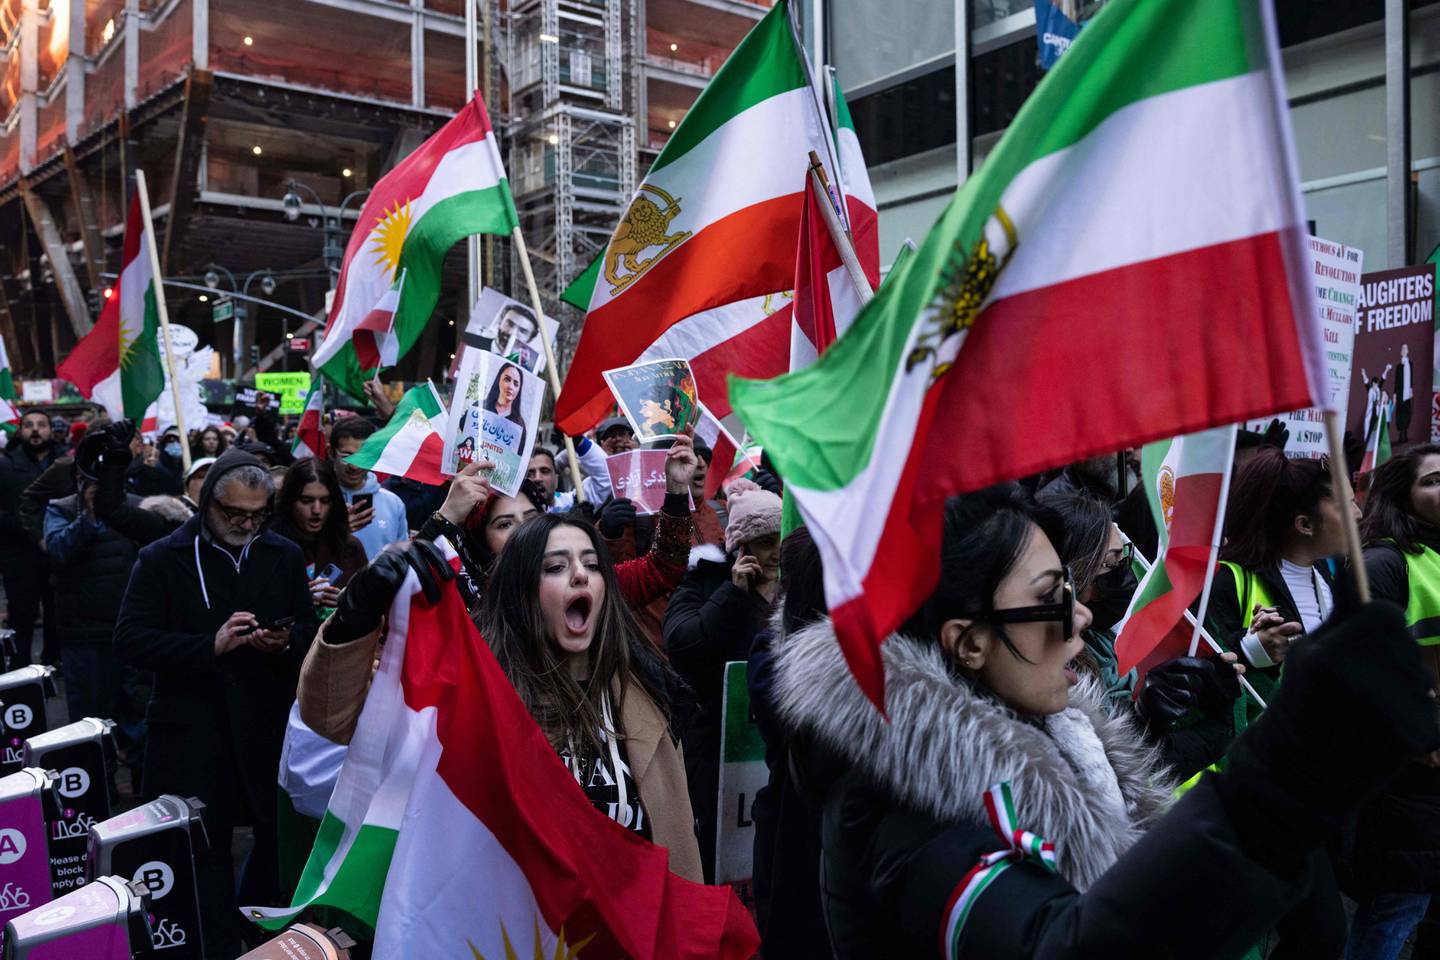 Protesters in New York call on the United Nations to take action against the treatment of women in Iran, after the death of Mahsa Amini while in custody in Tehran, November 19, 2022. AFP